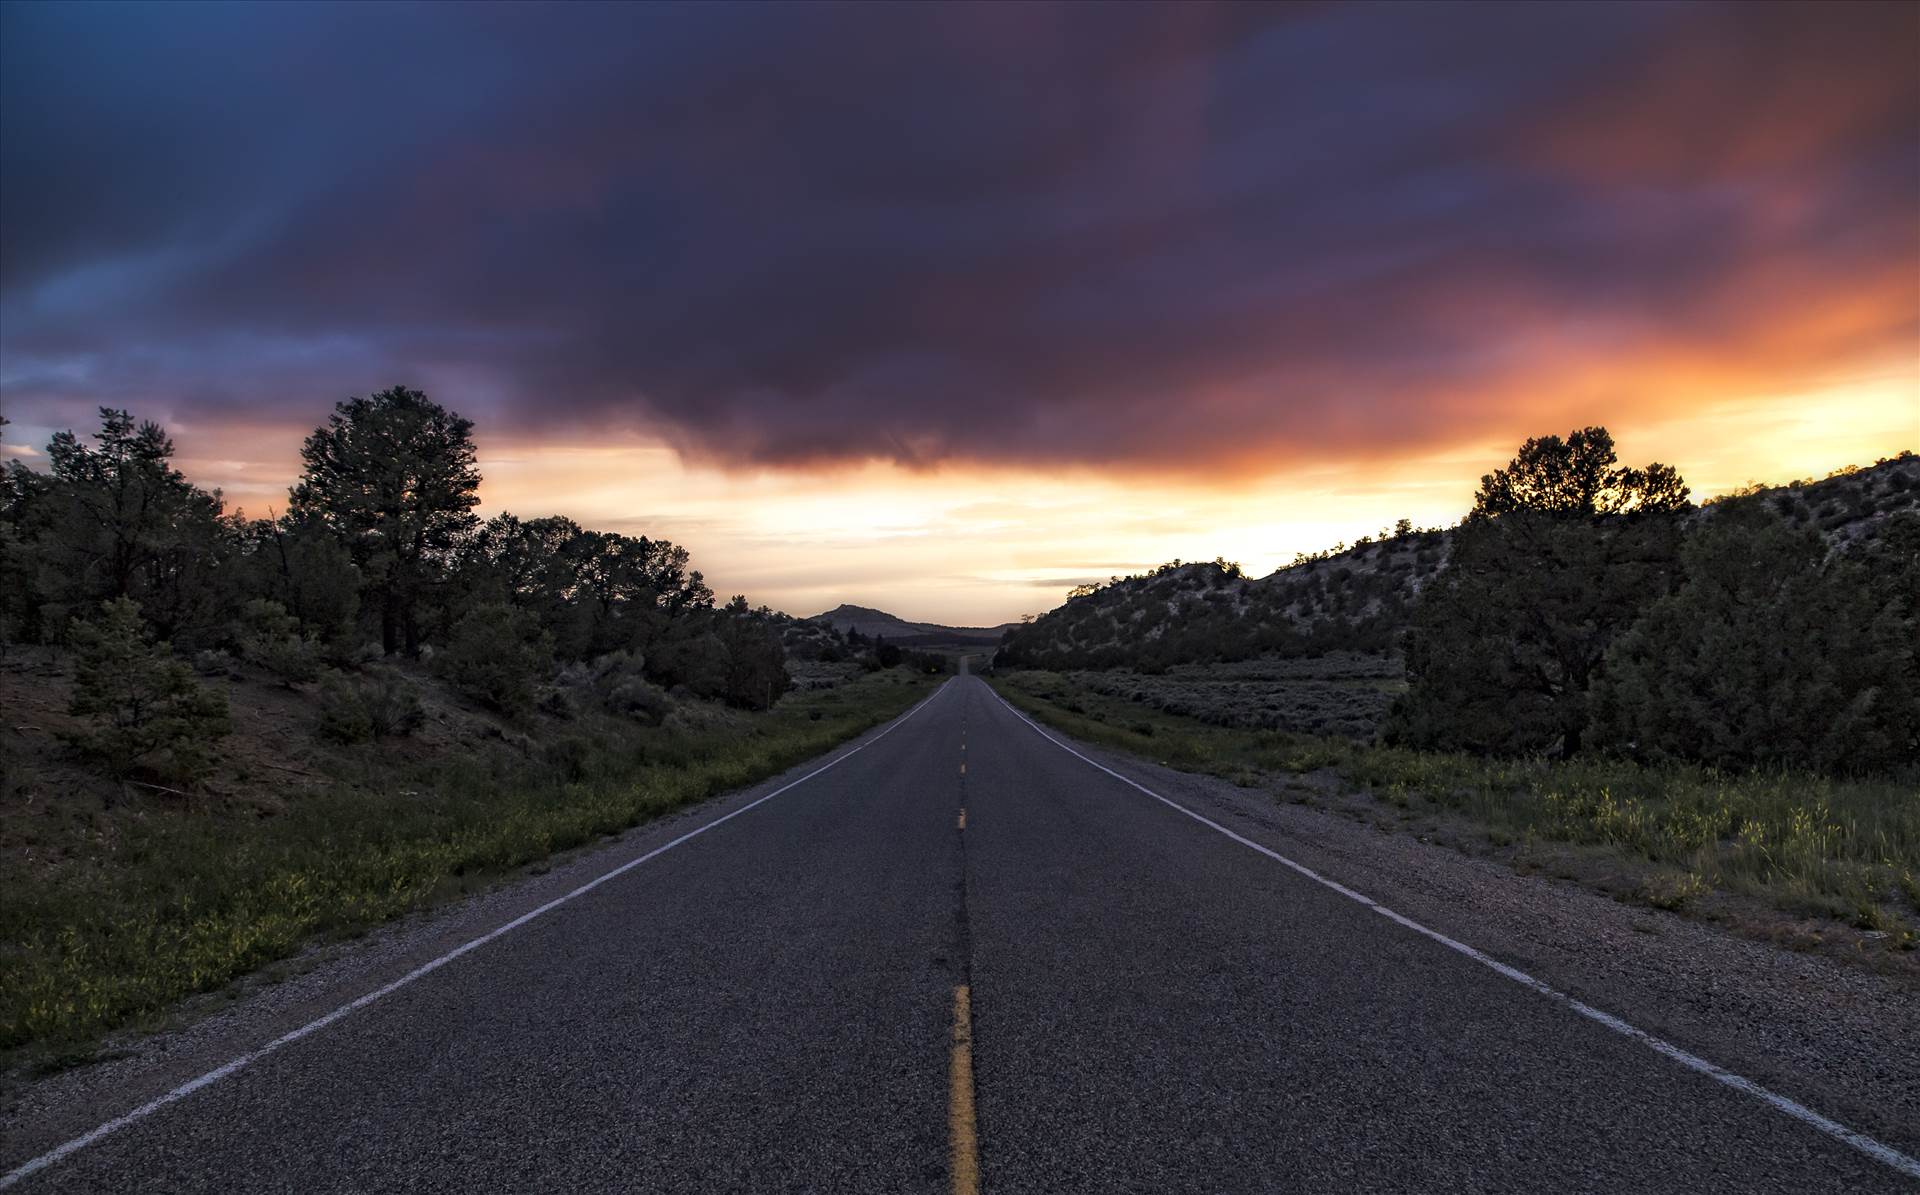 Road From Gallina New Mexico.jpg - undefined by Joey Onyxone Sandoval